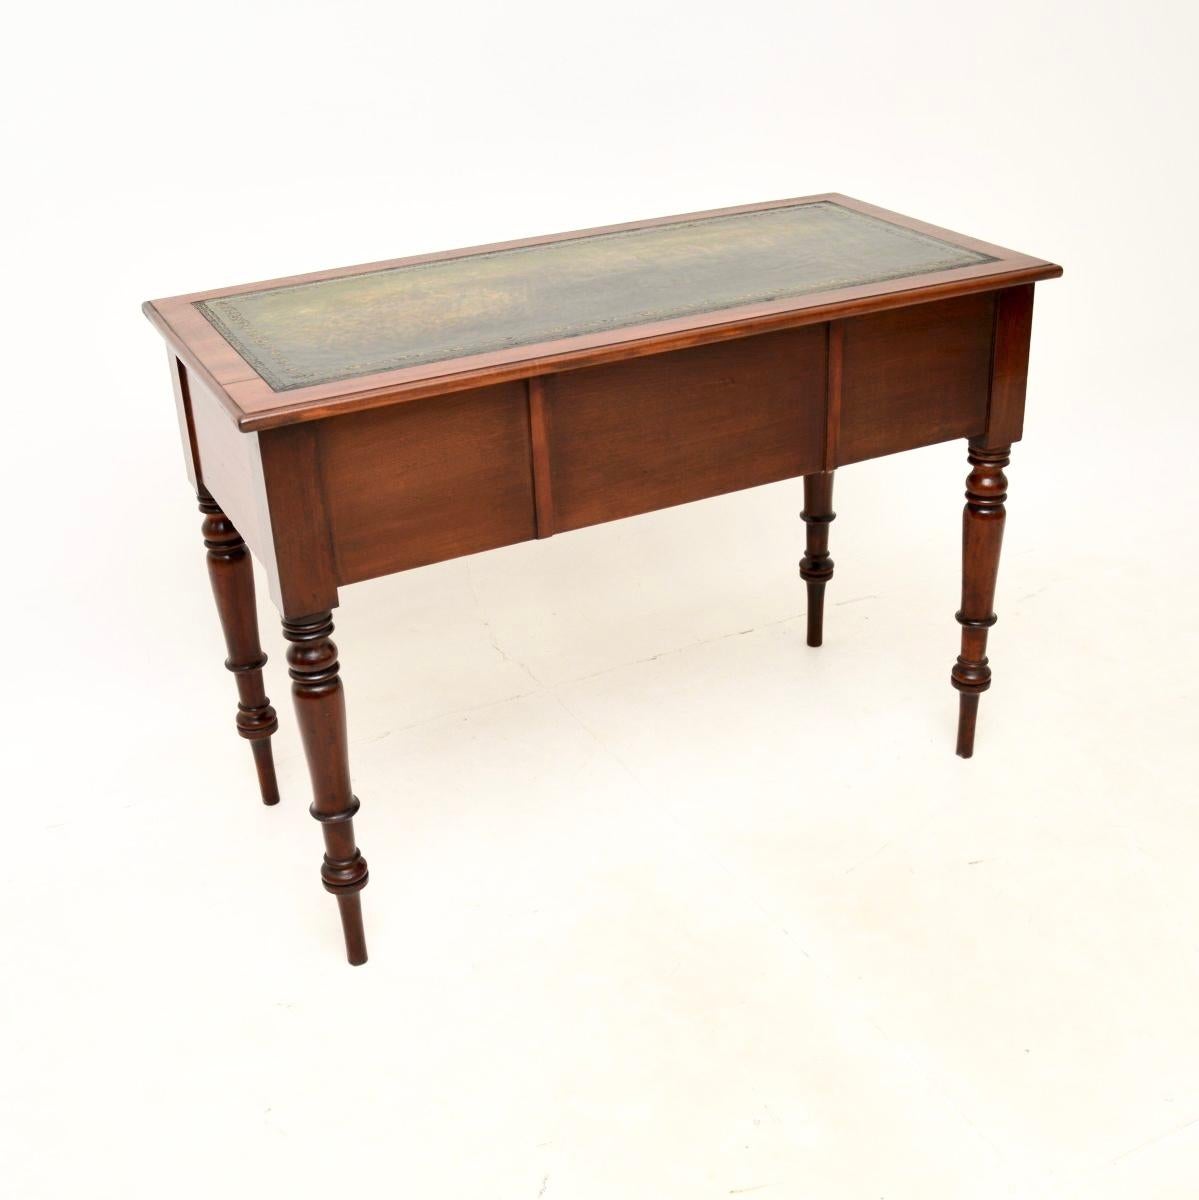 Early 19th Century Antique Georgian Period Writing Table / Desk